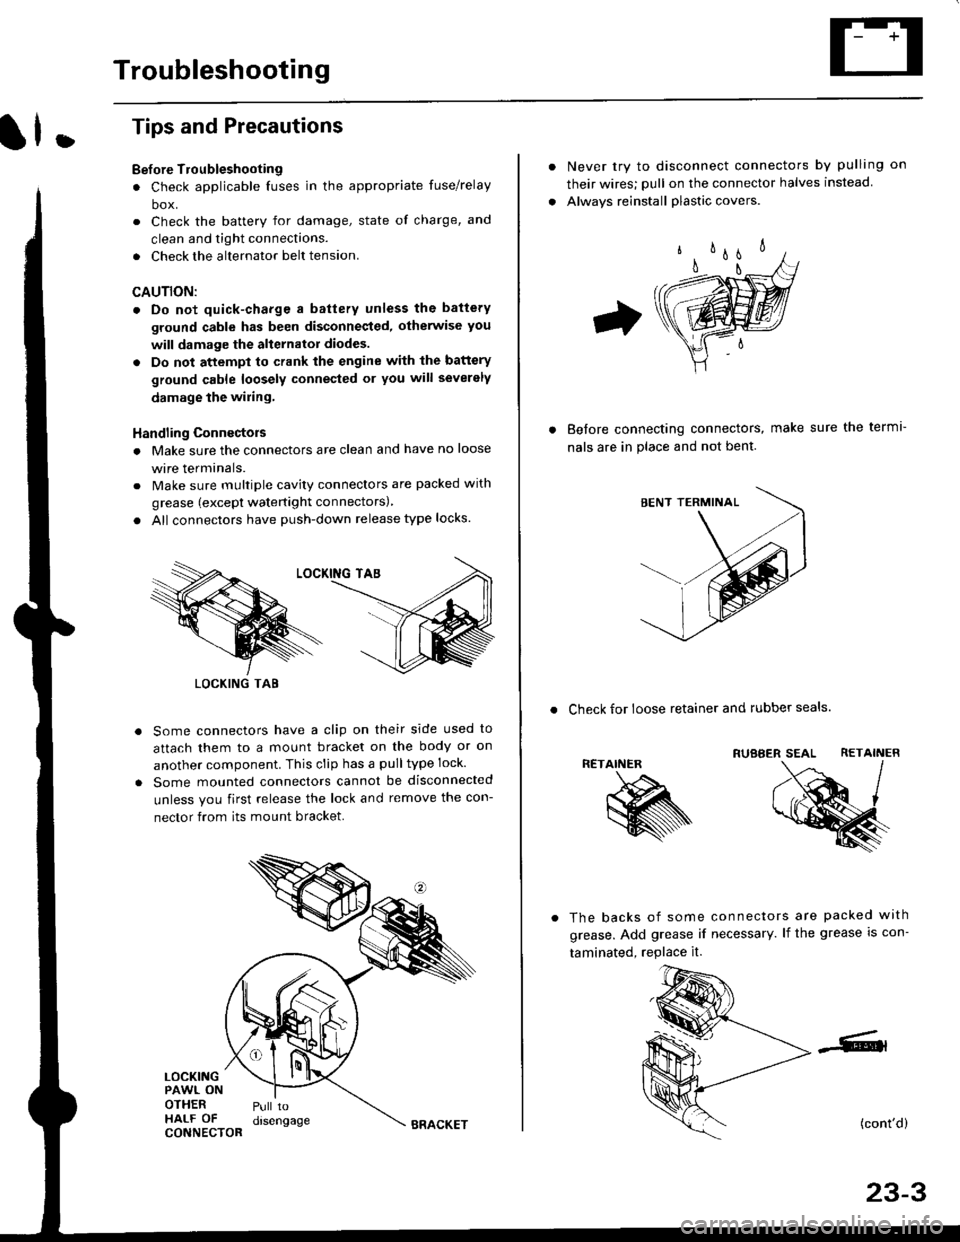 HONDA CIVIC 1996 6.G Workshop Manual Troubleshooting
ll.
Tips and Precautions
Bef ore Troubleshooting
. Check applicable fuses in the appropriate fuse/relay
box.
. Check the battery for damage, state of charge, and
clean and tight connec